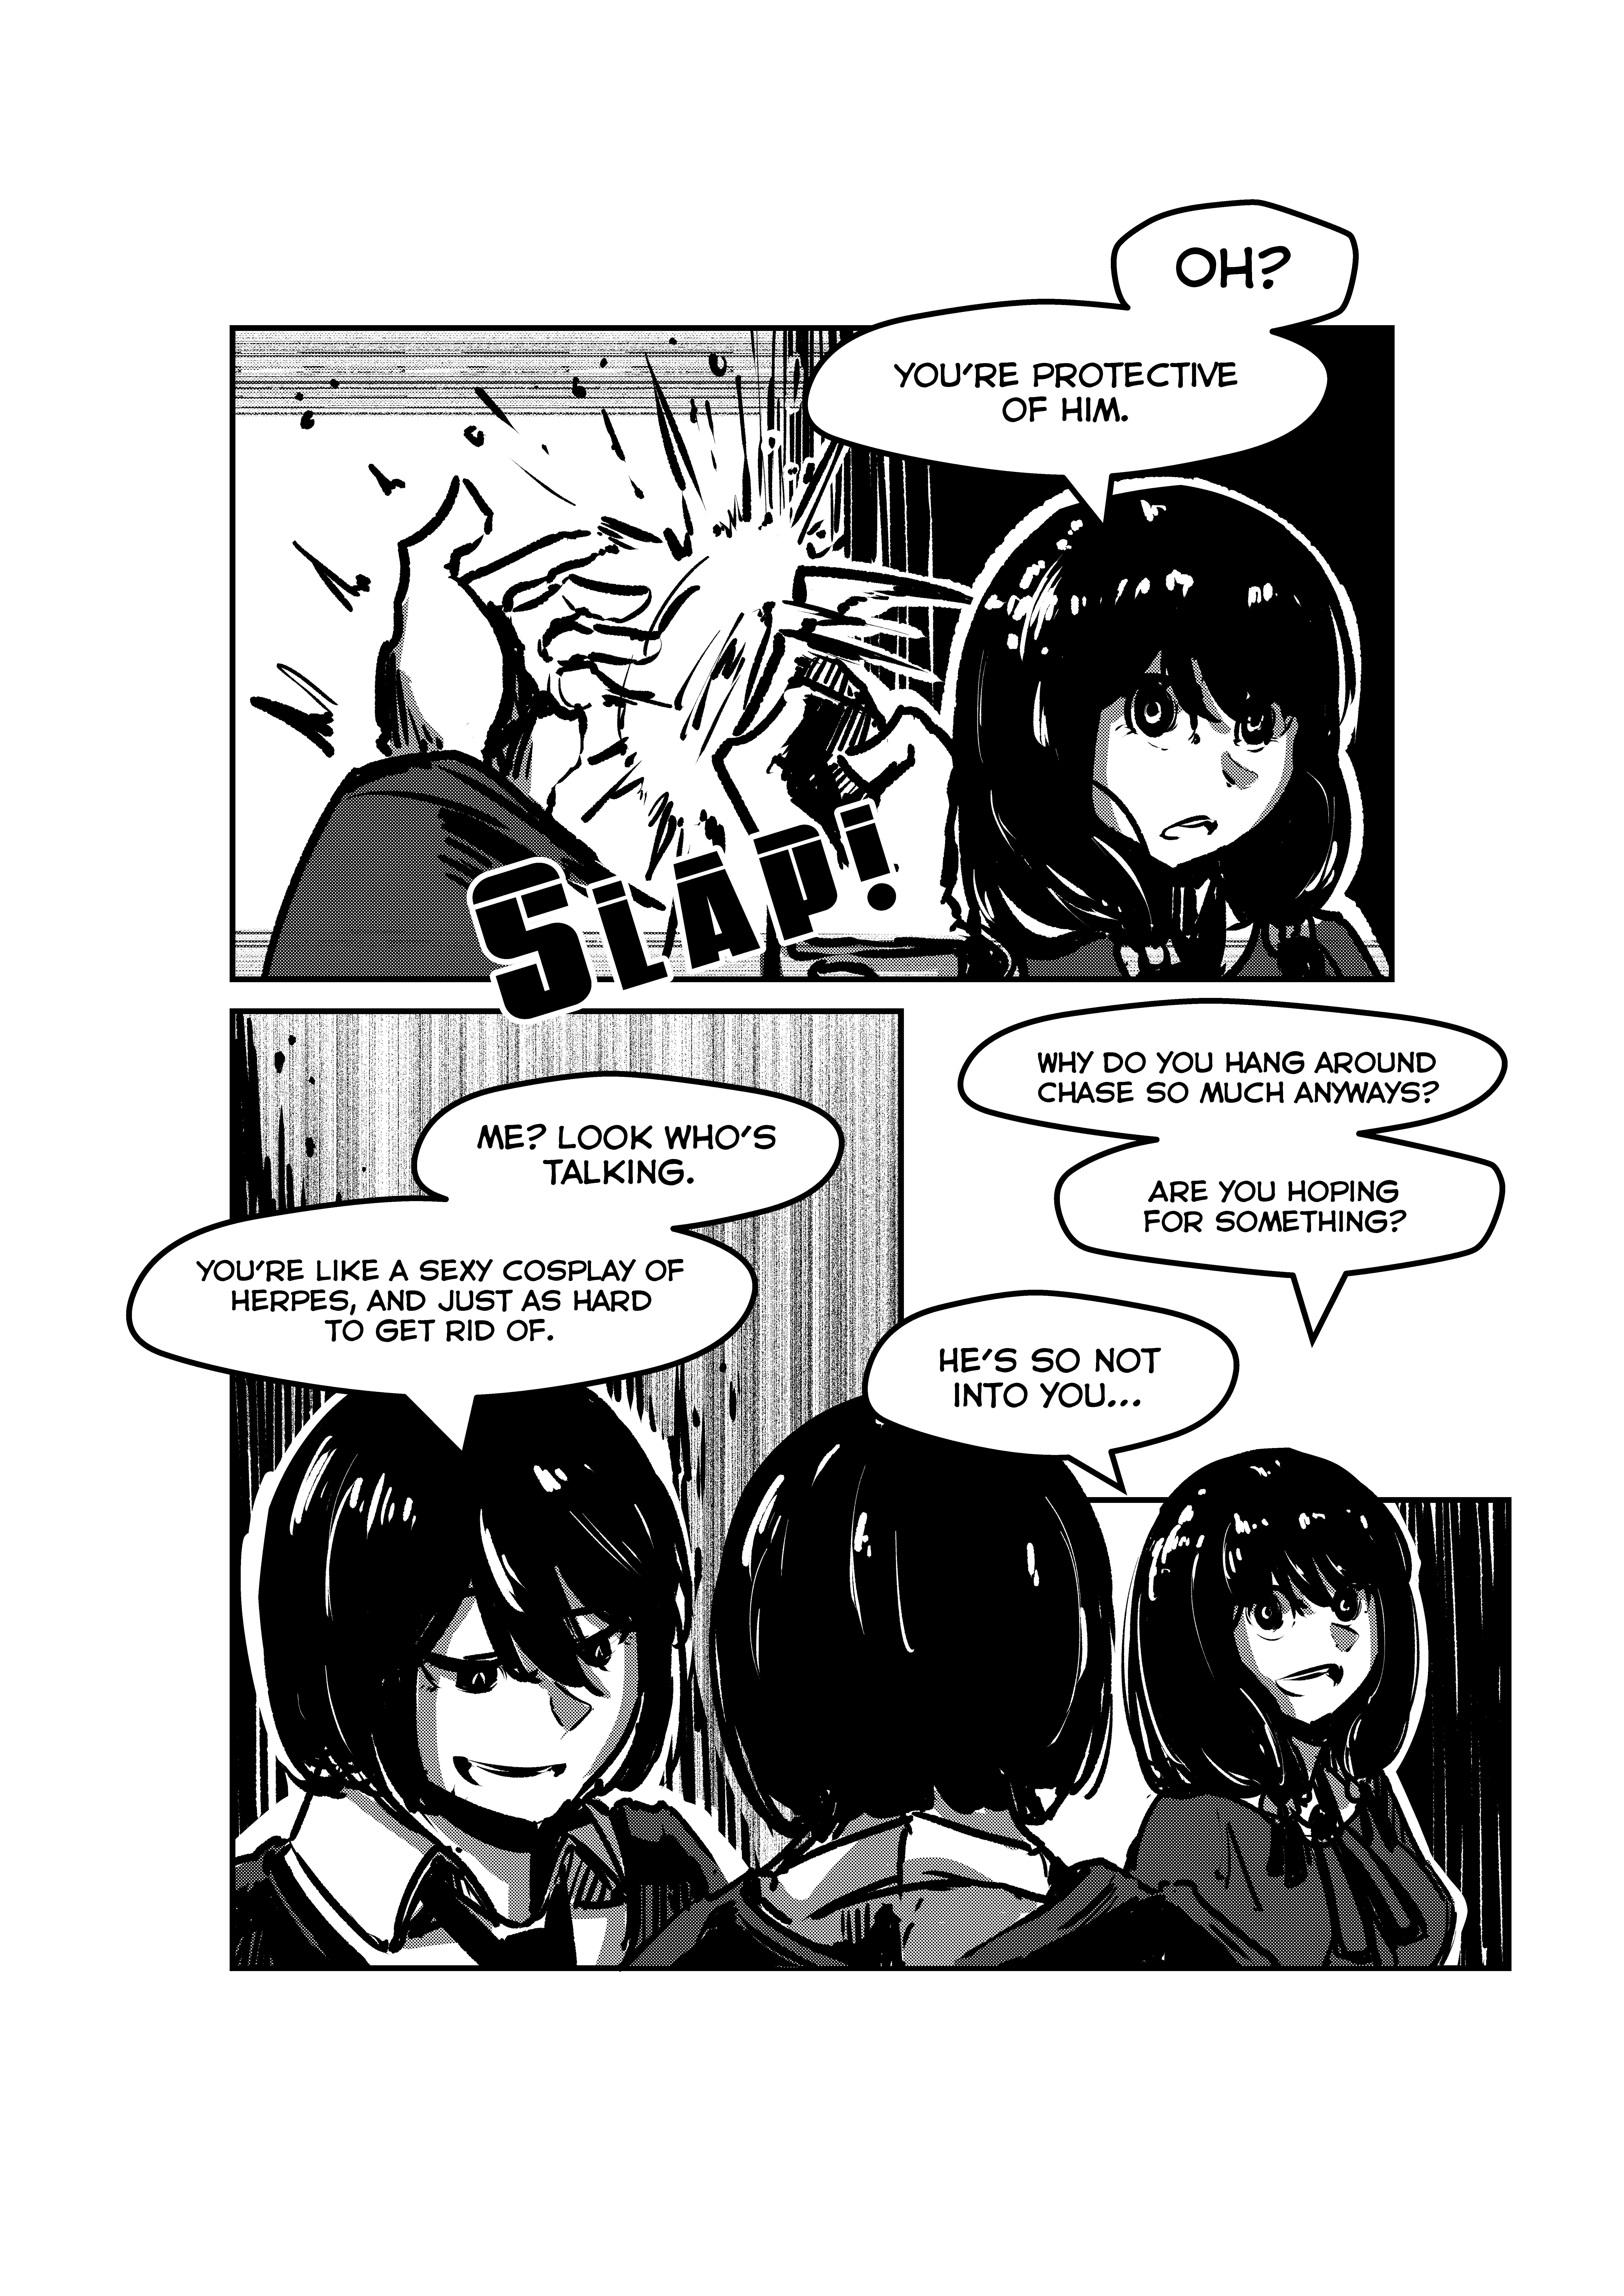 Opposites In Disguise - 11 page 16